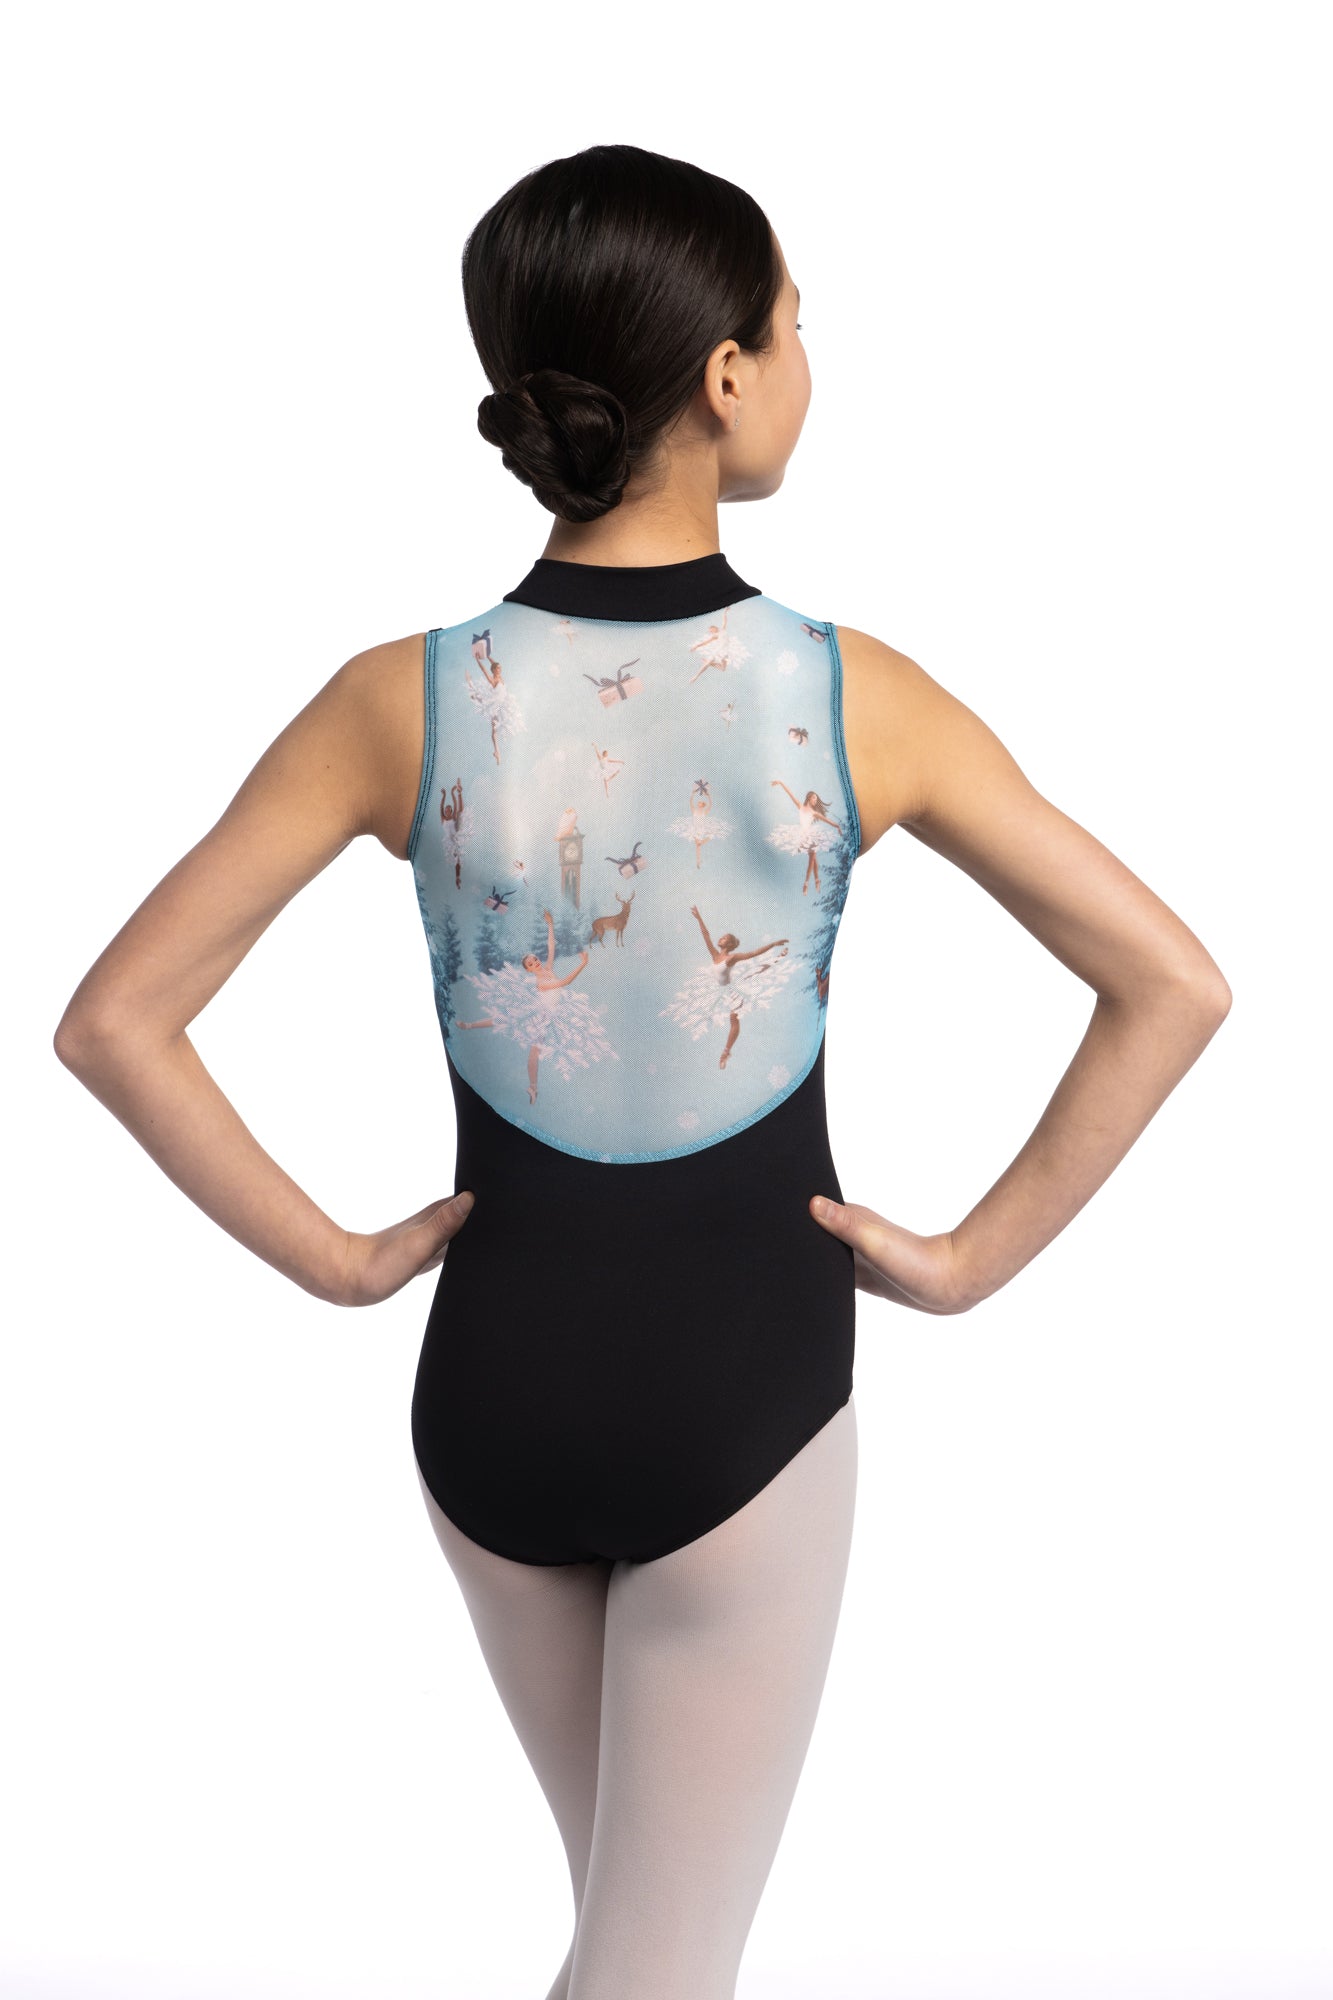 Not Just Another Dance Studio - I was thrilled to learn today that KT by  KNIX now has All-New Period-Proof Leotard & Tights! Their teen period  underwear and swimsuits are awesome, and